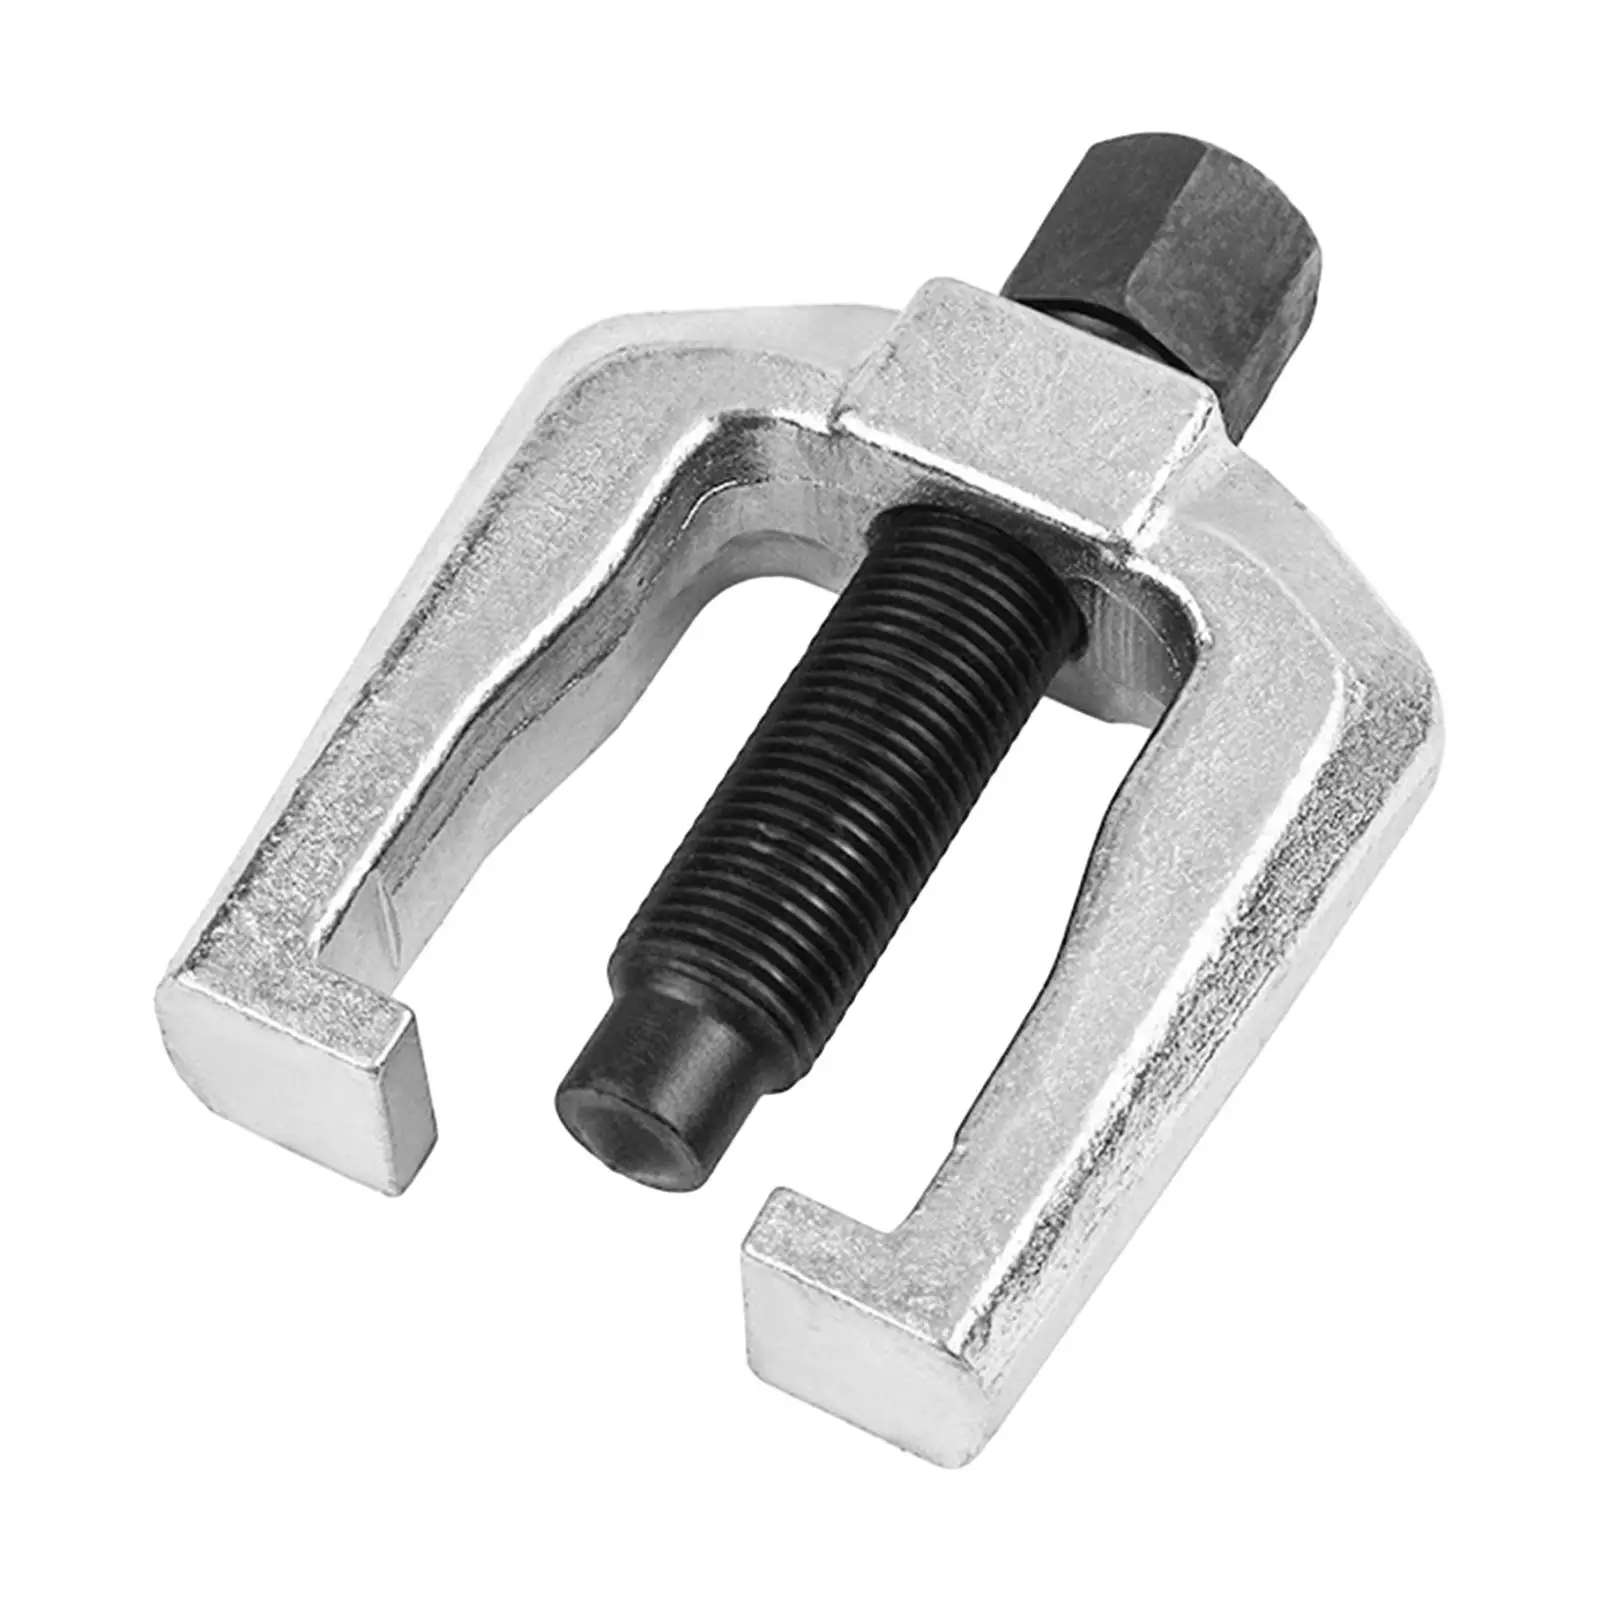 Slack Adjuster Puller Compact Durable Metal Trucks Heavy Duty Professional Repair Tool Works on Automatic Adjusters Remover Tool